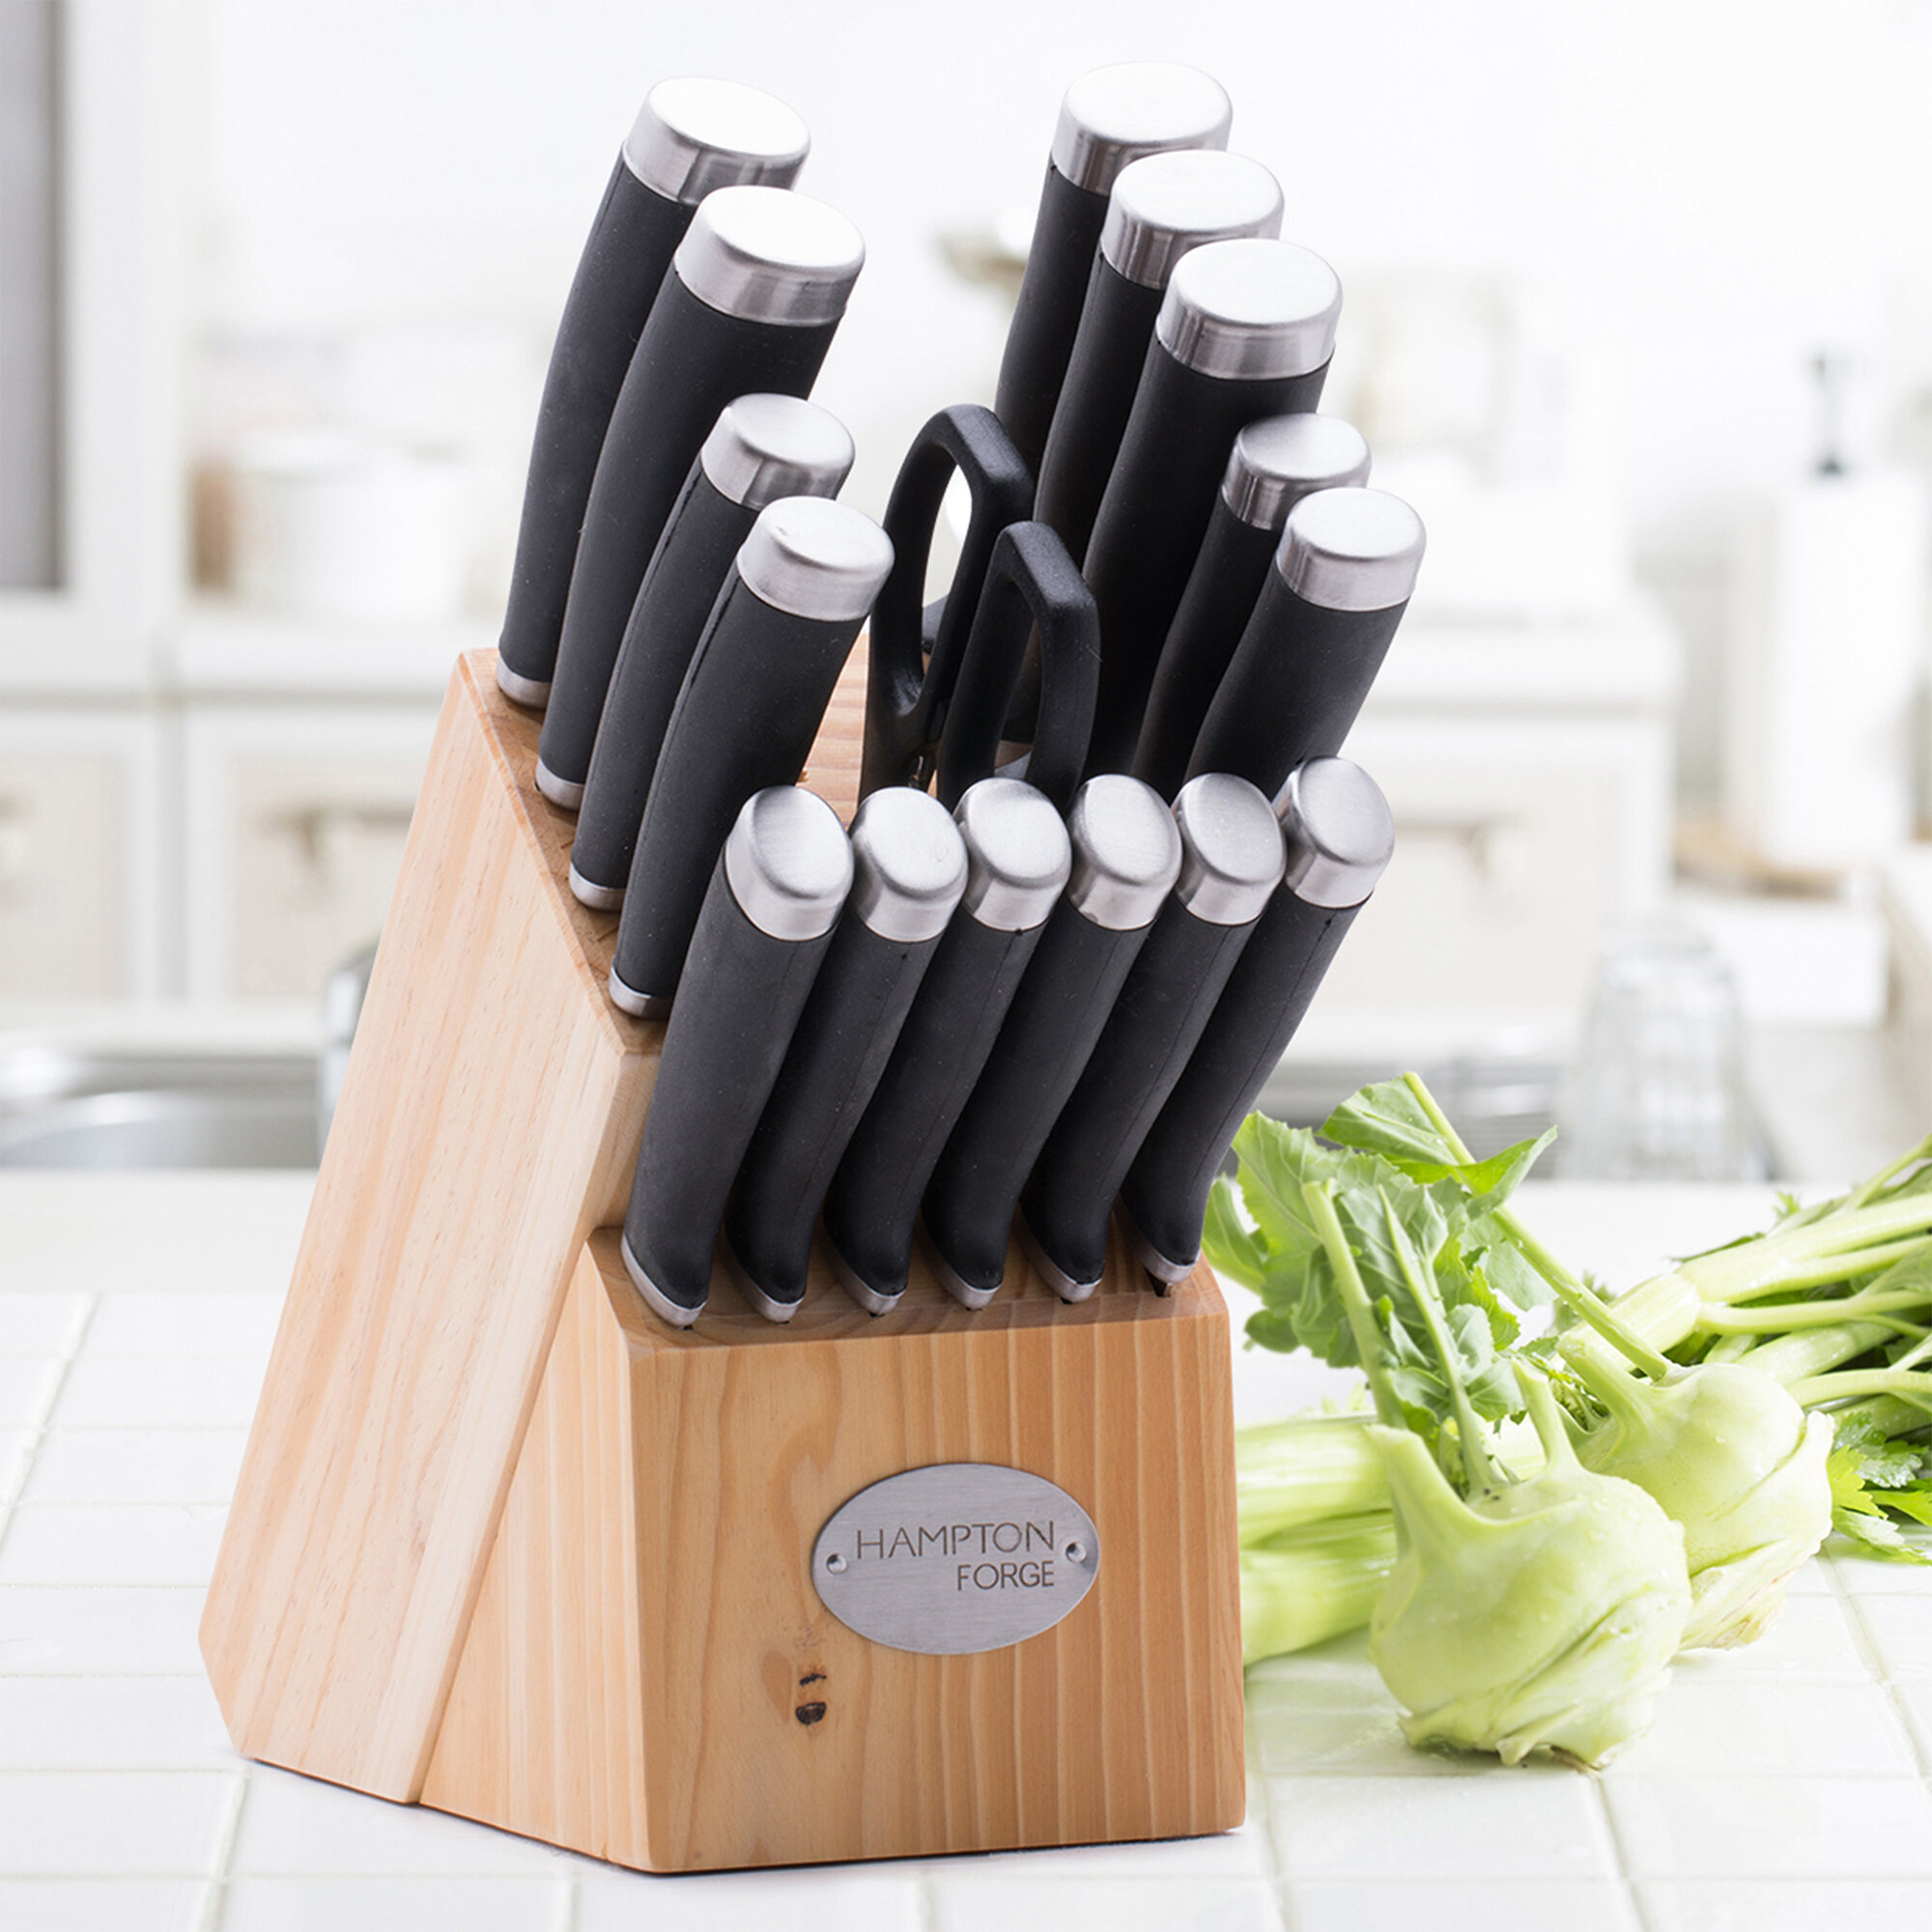 17 Pcs Stainless Steel Knife Block Set, Includes Sharpener, Chef Knife,  Measuring Spoons, Scissors, and Steak Knives, Dishwasher Safe for Easy  Cleaning